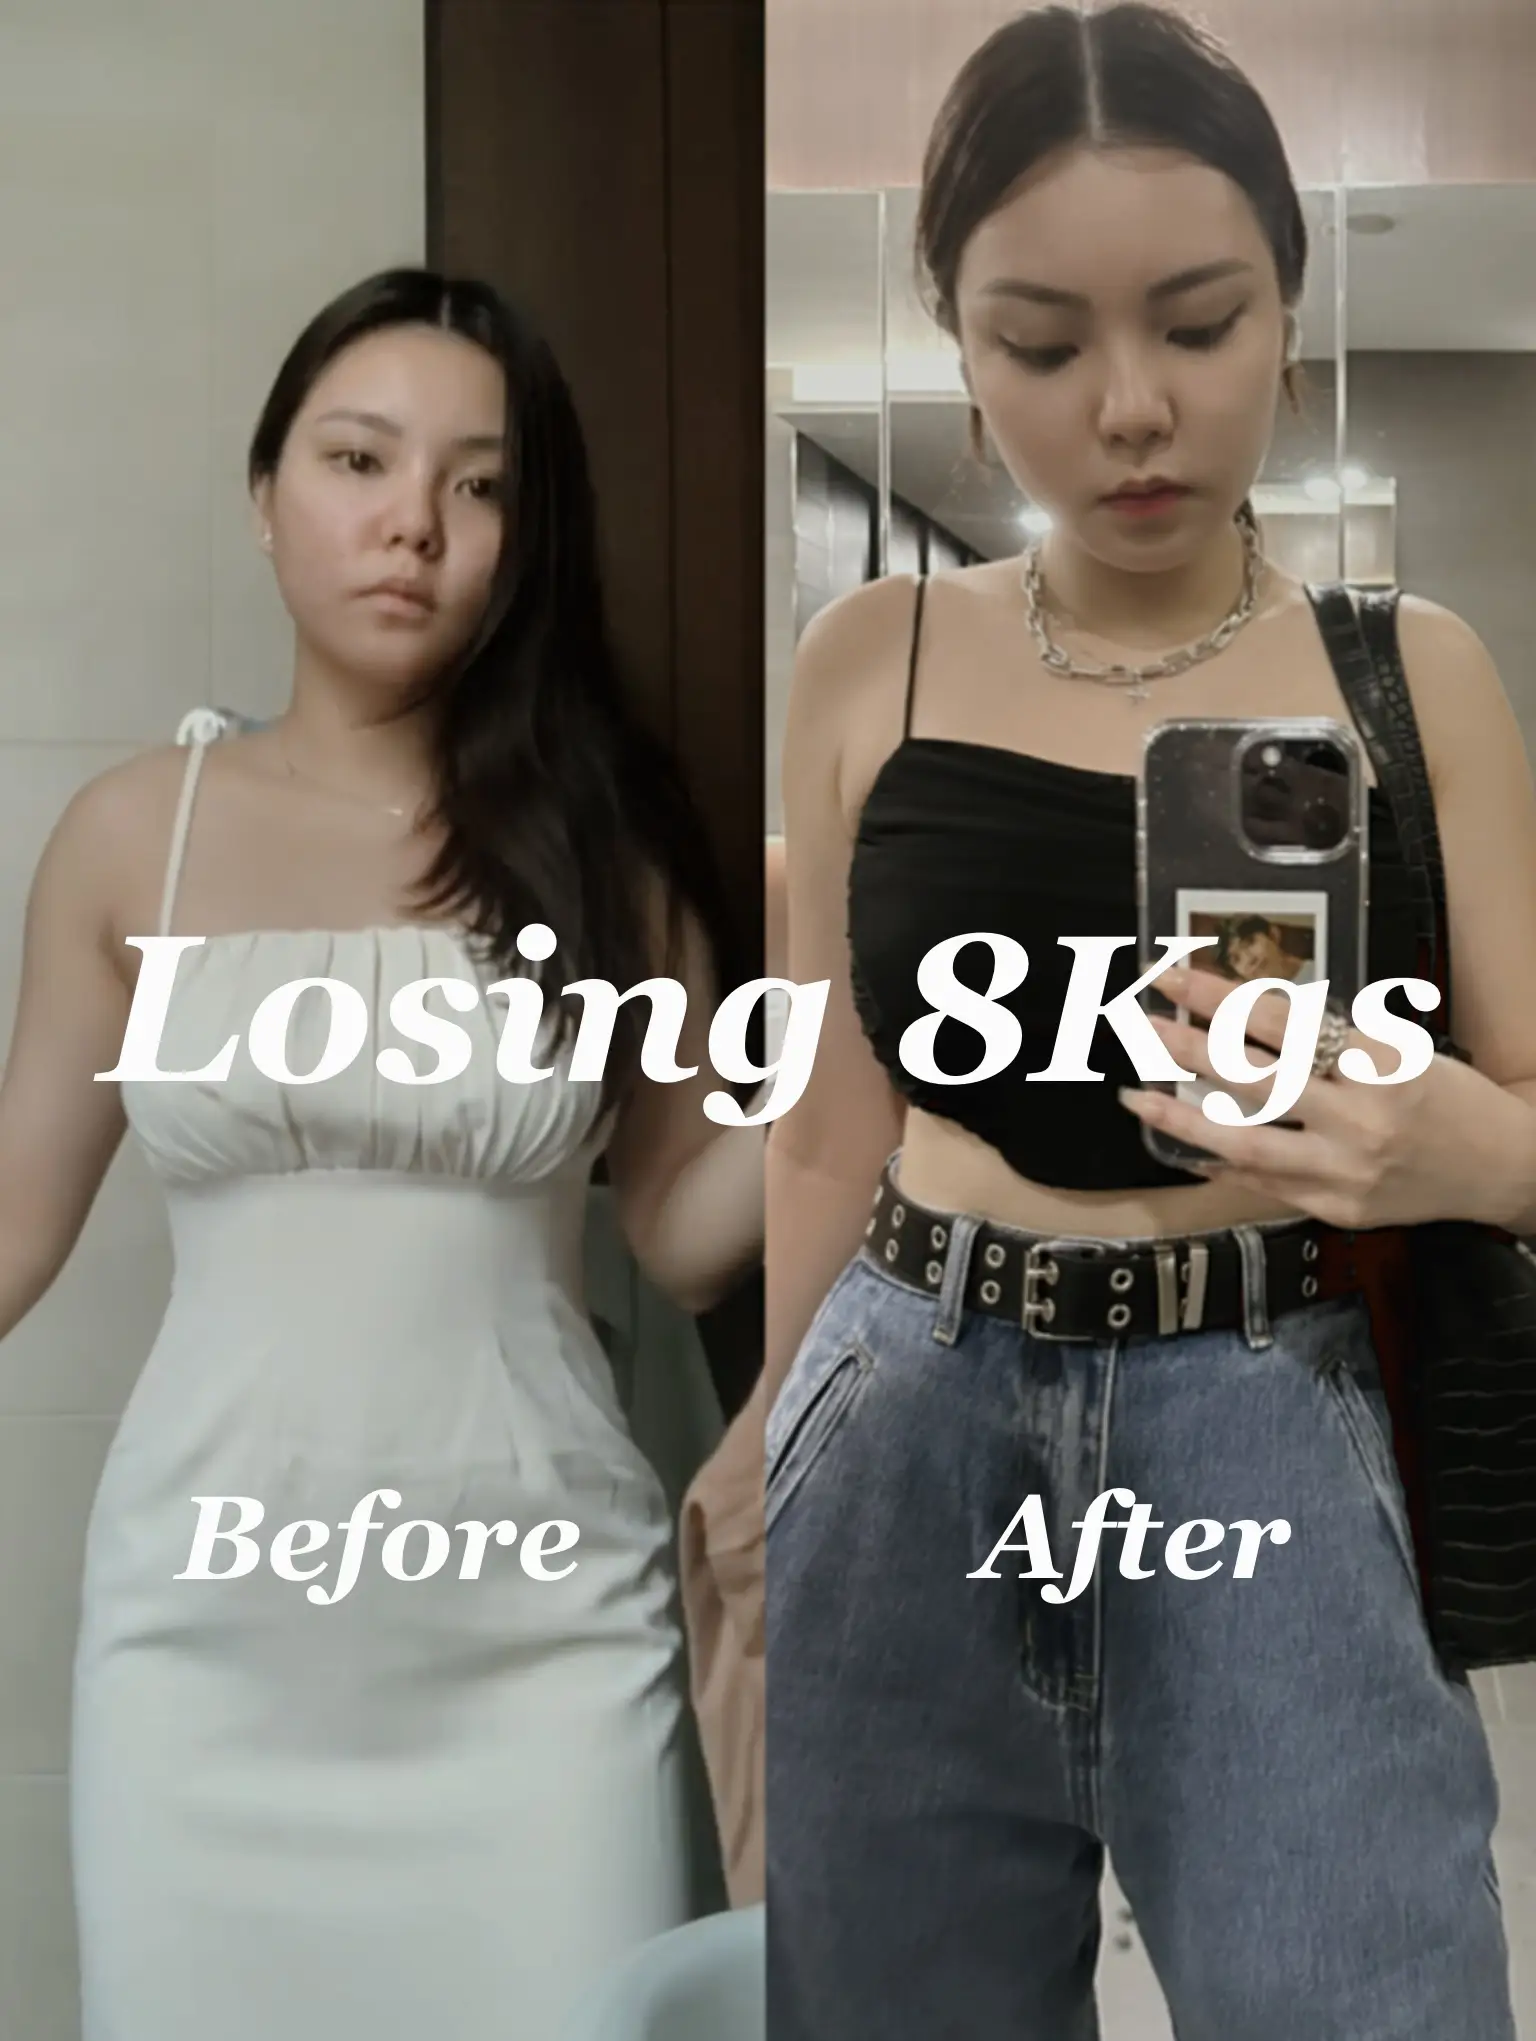 Losing 8KG in Months?! 😳 My Diet Tips's images(0)